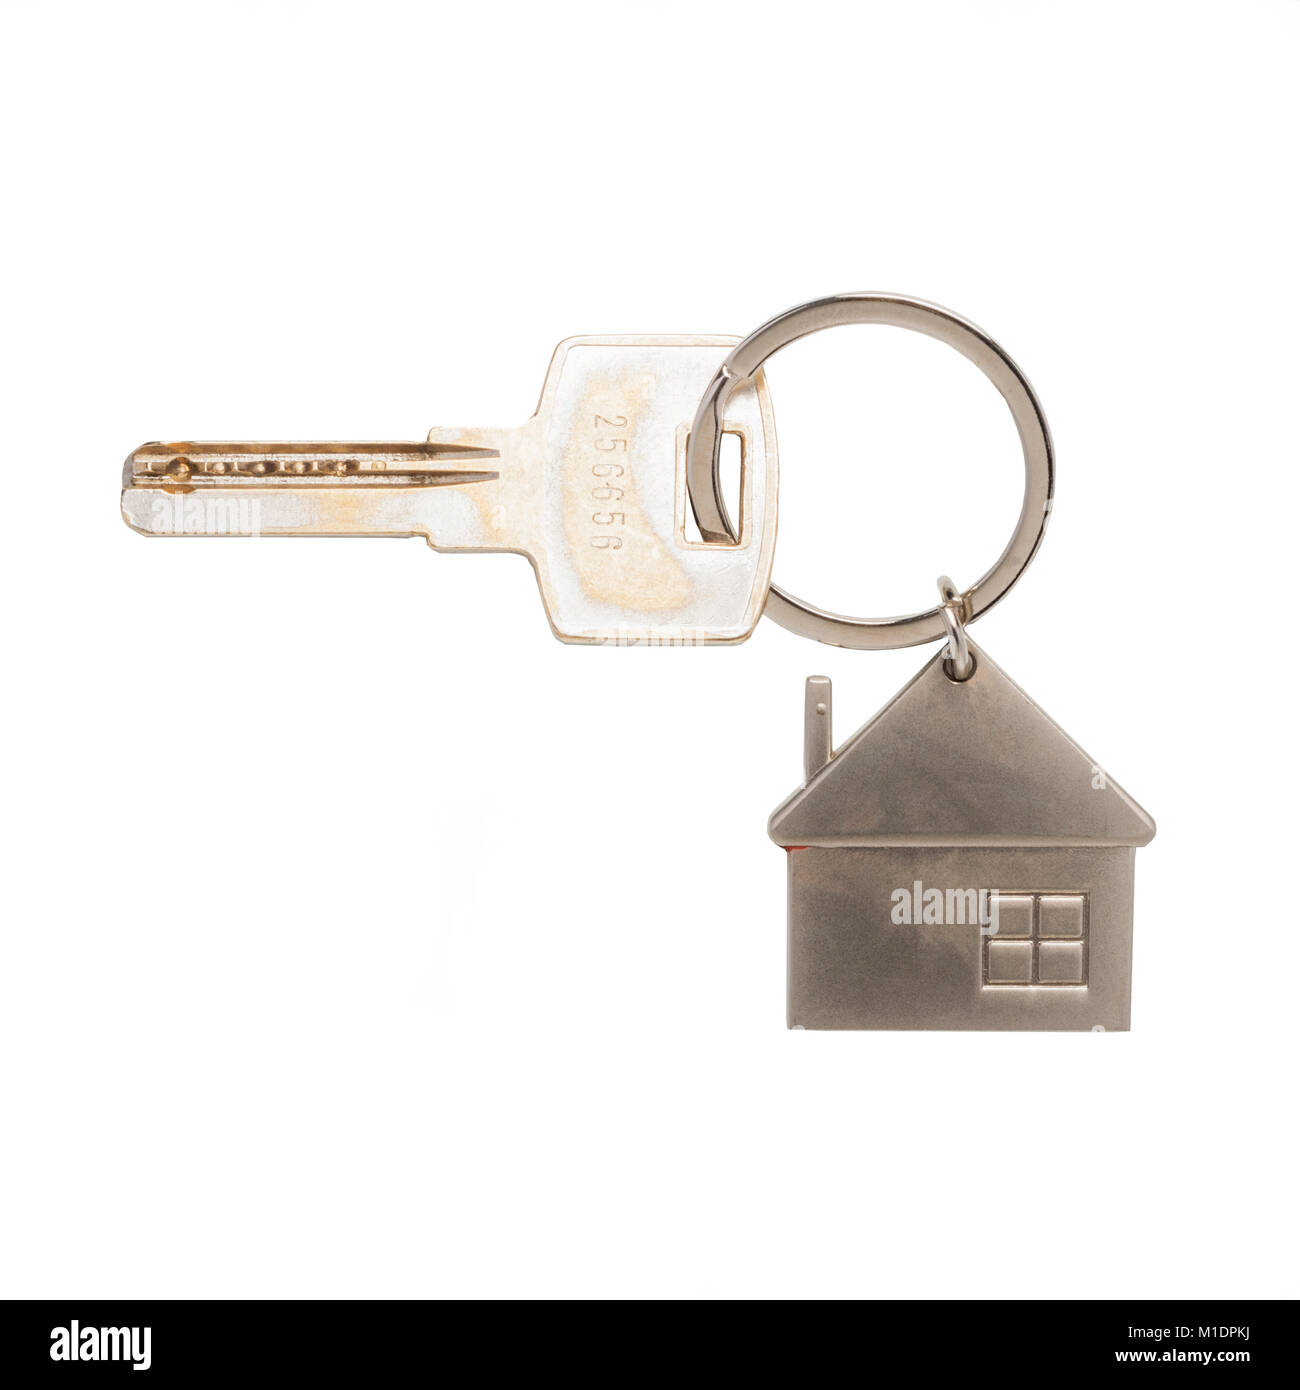 A house key on a house key ring on a white background Stock Photo